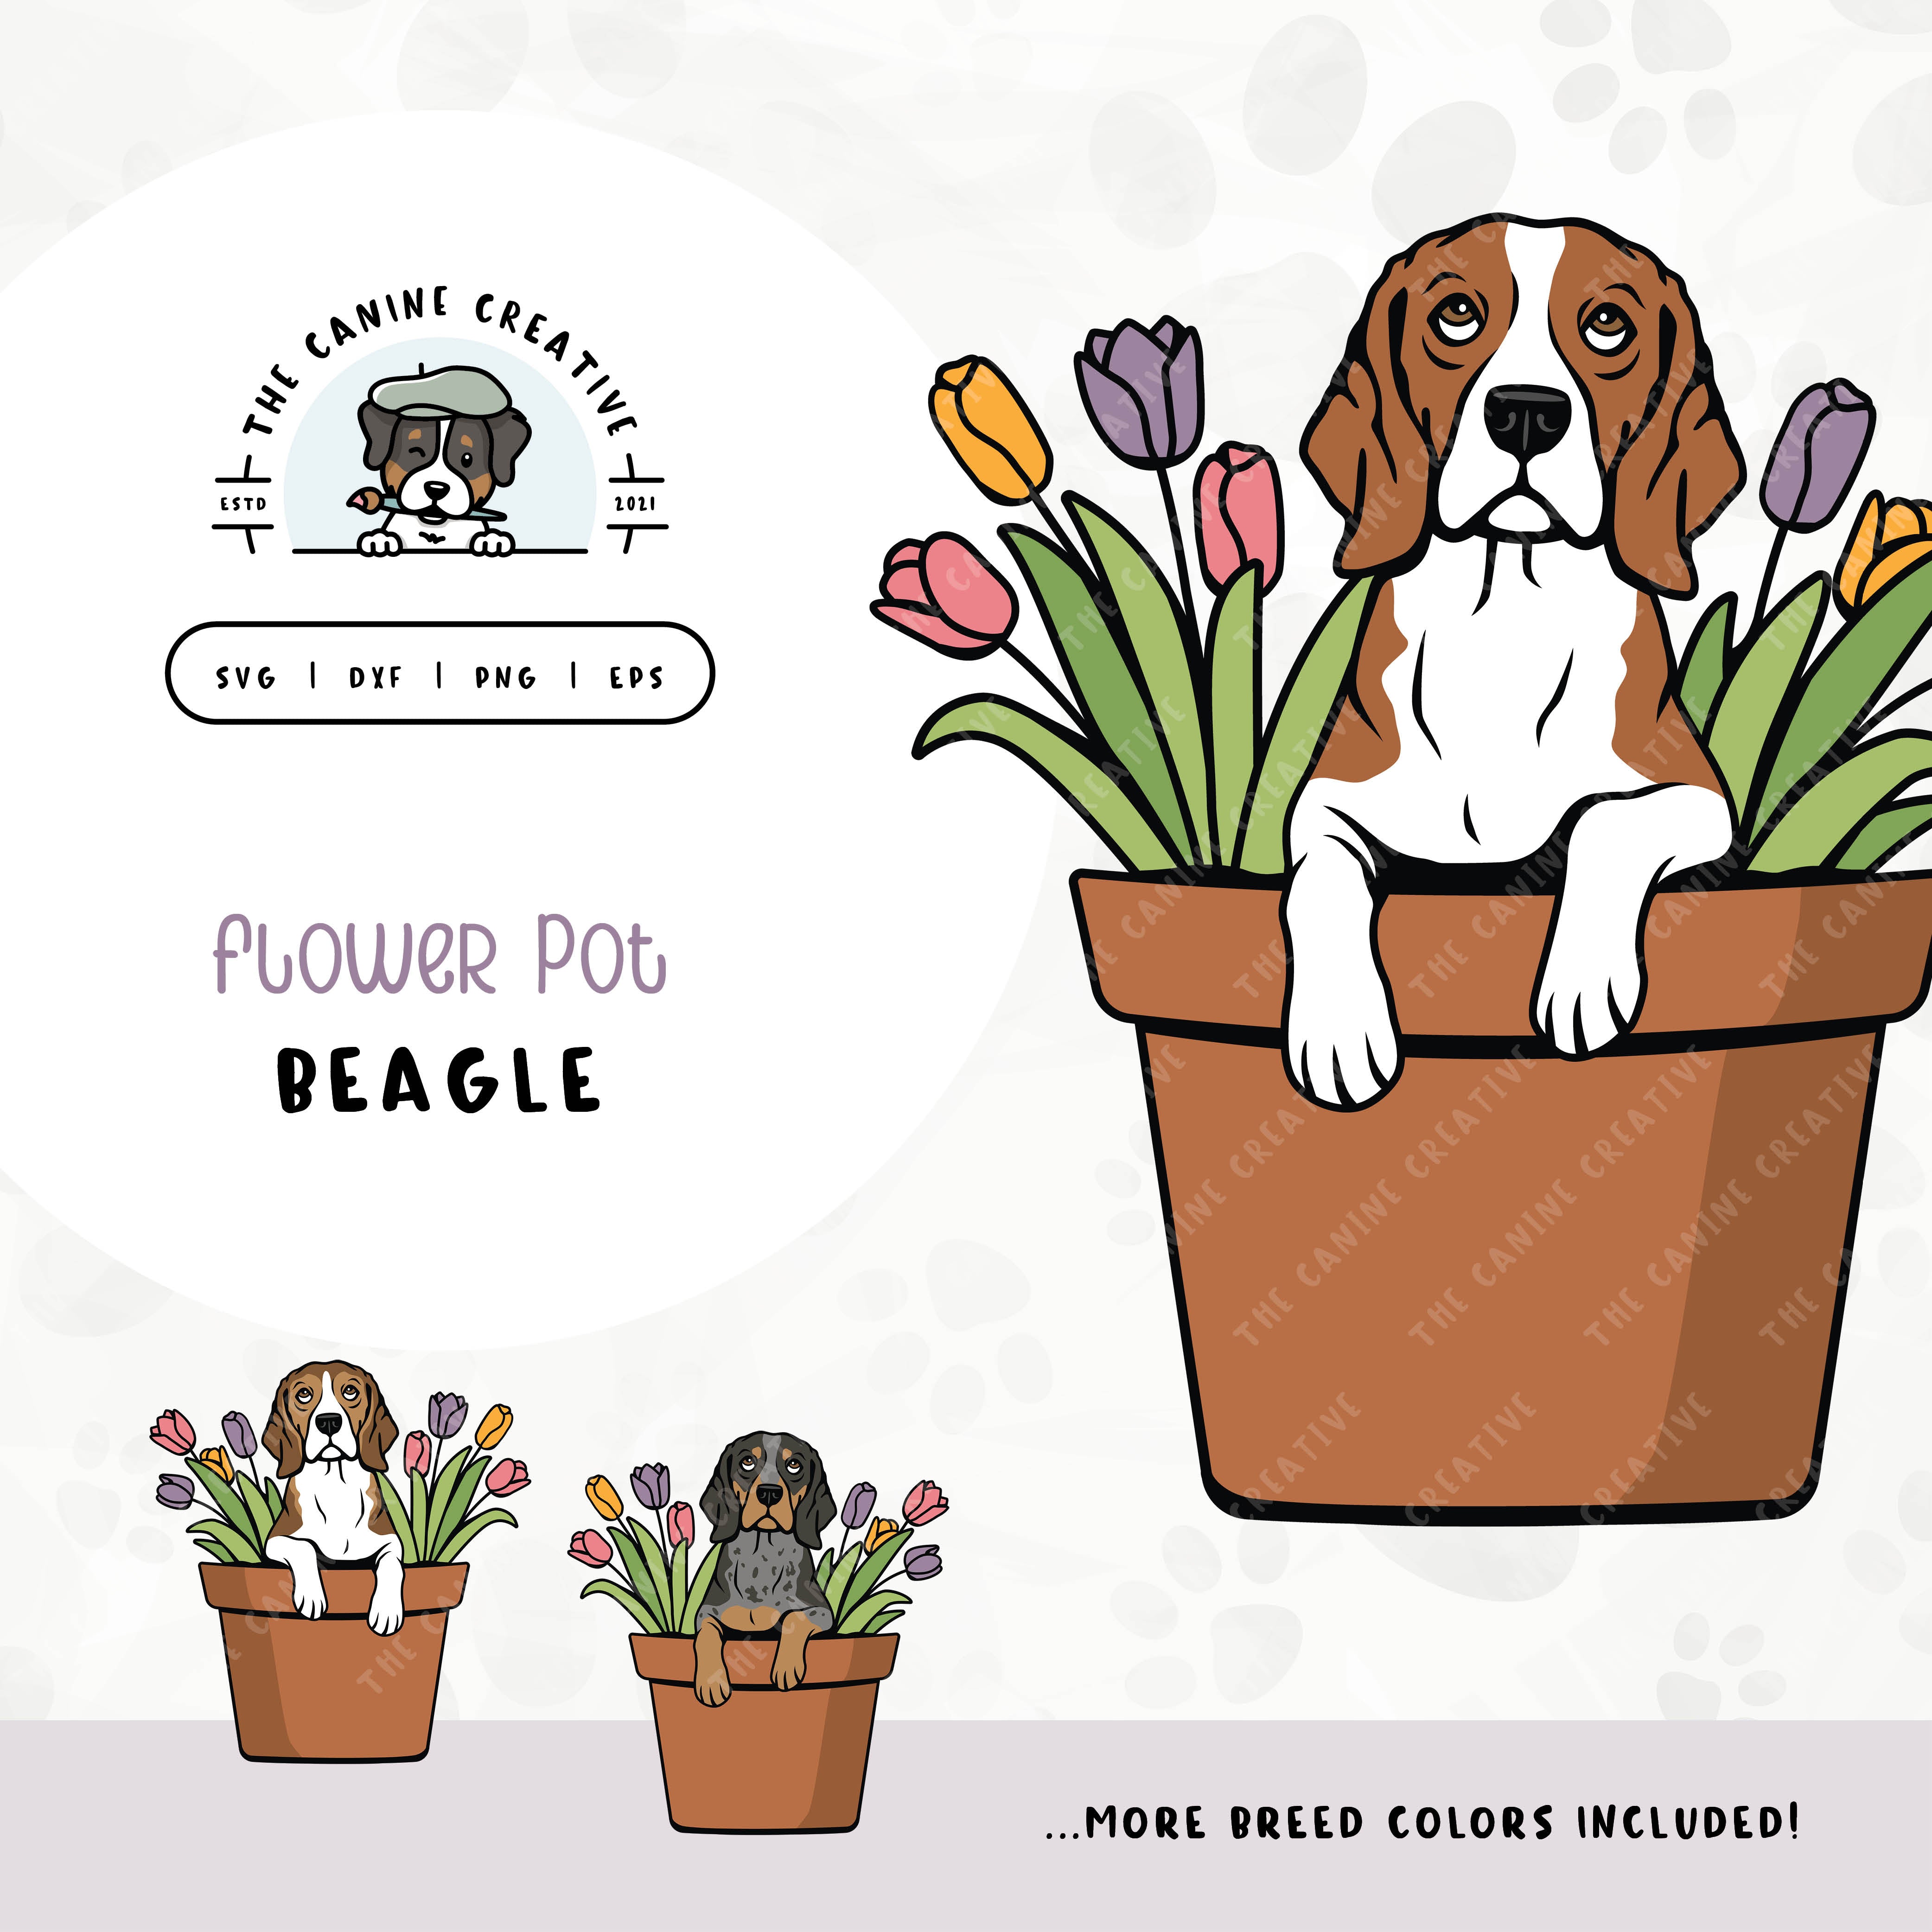 This springtime illustration features a Beagle peeking out of a pot of vibrant tulips. File formats include: SVG, DXF, PNG, and EPS.